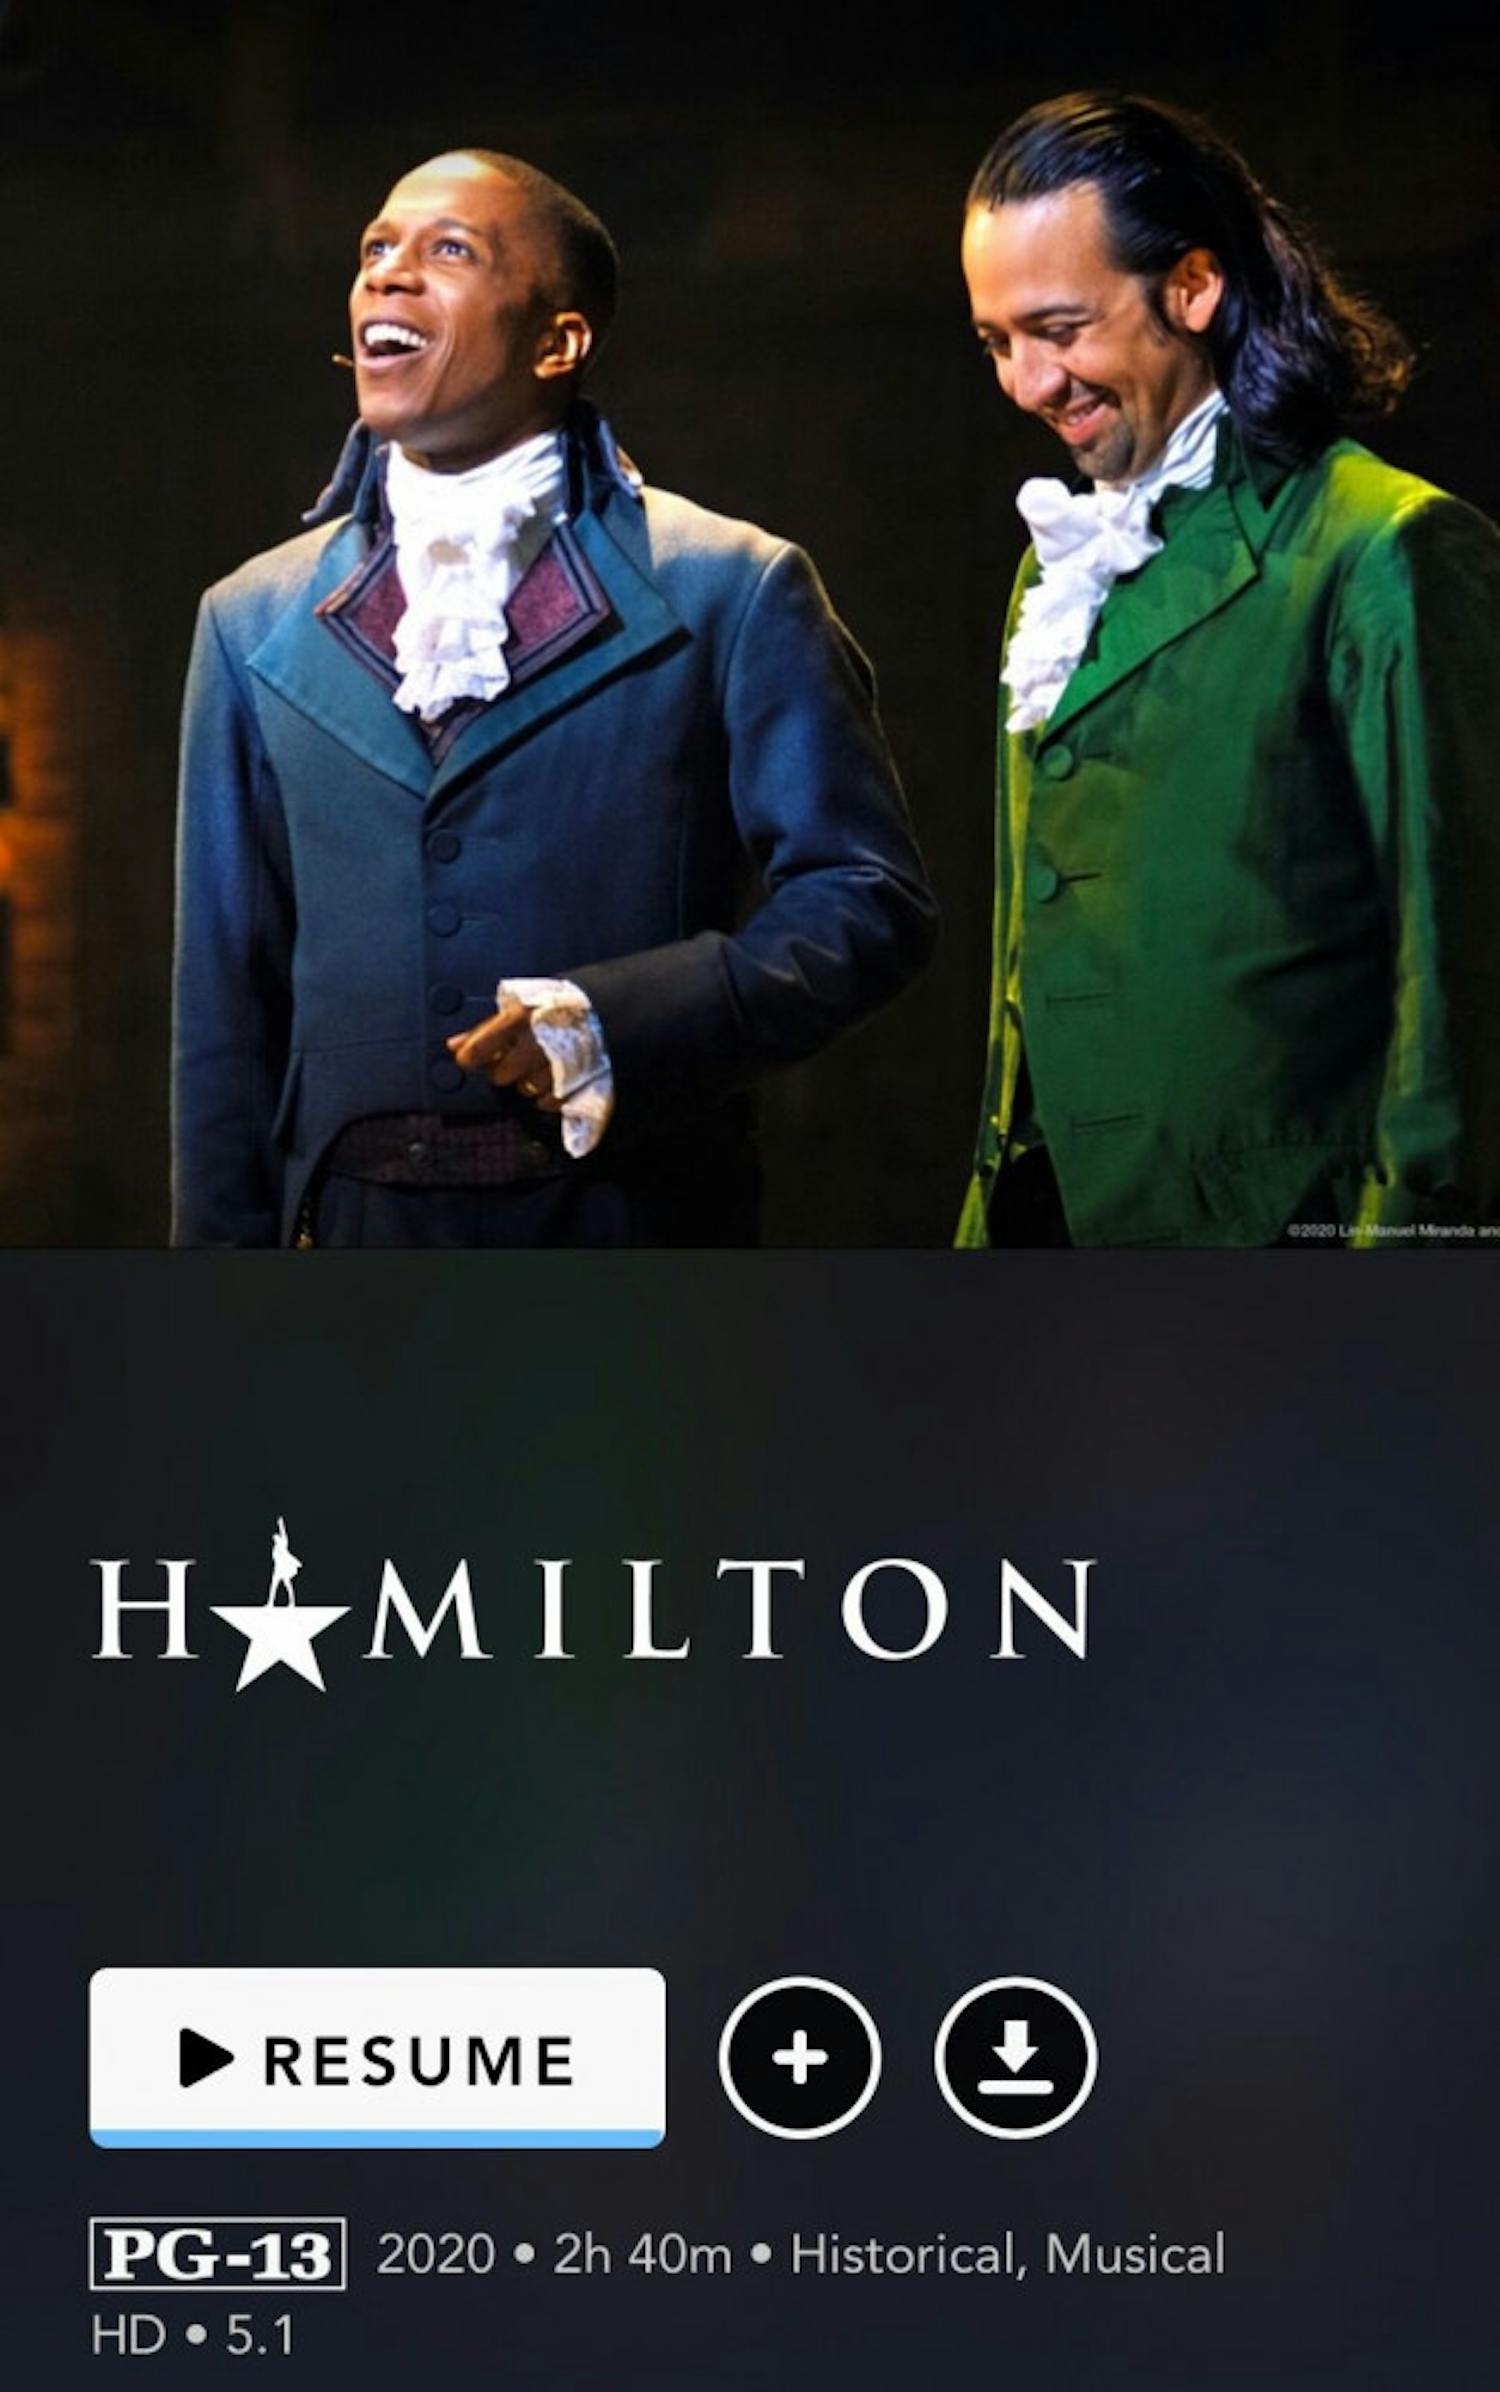 Hamilton, which premiered on Broadway in 2015, joined Disney+ July 4.&nbsp;